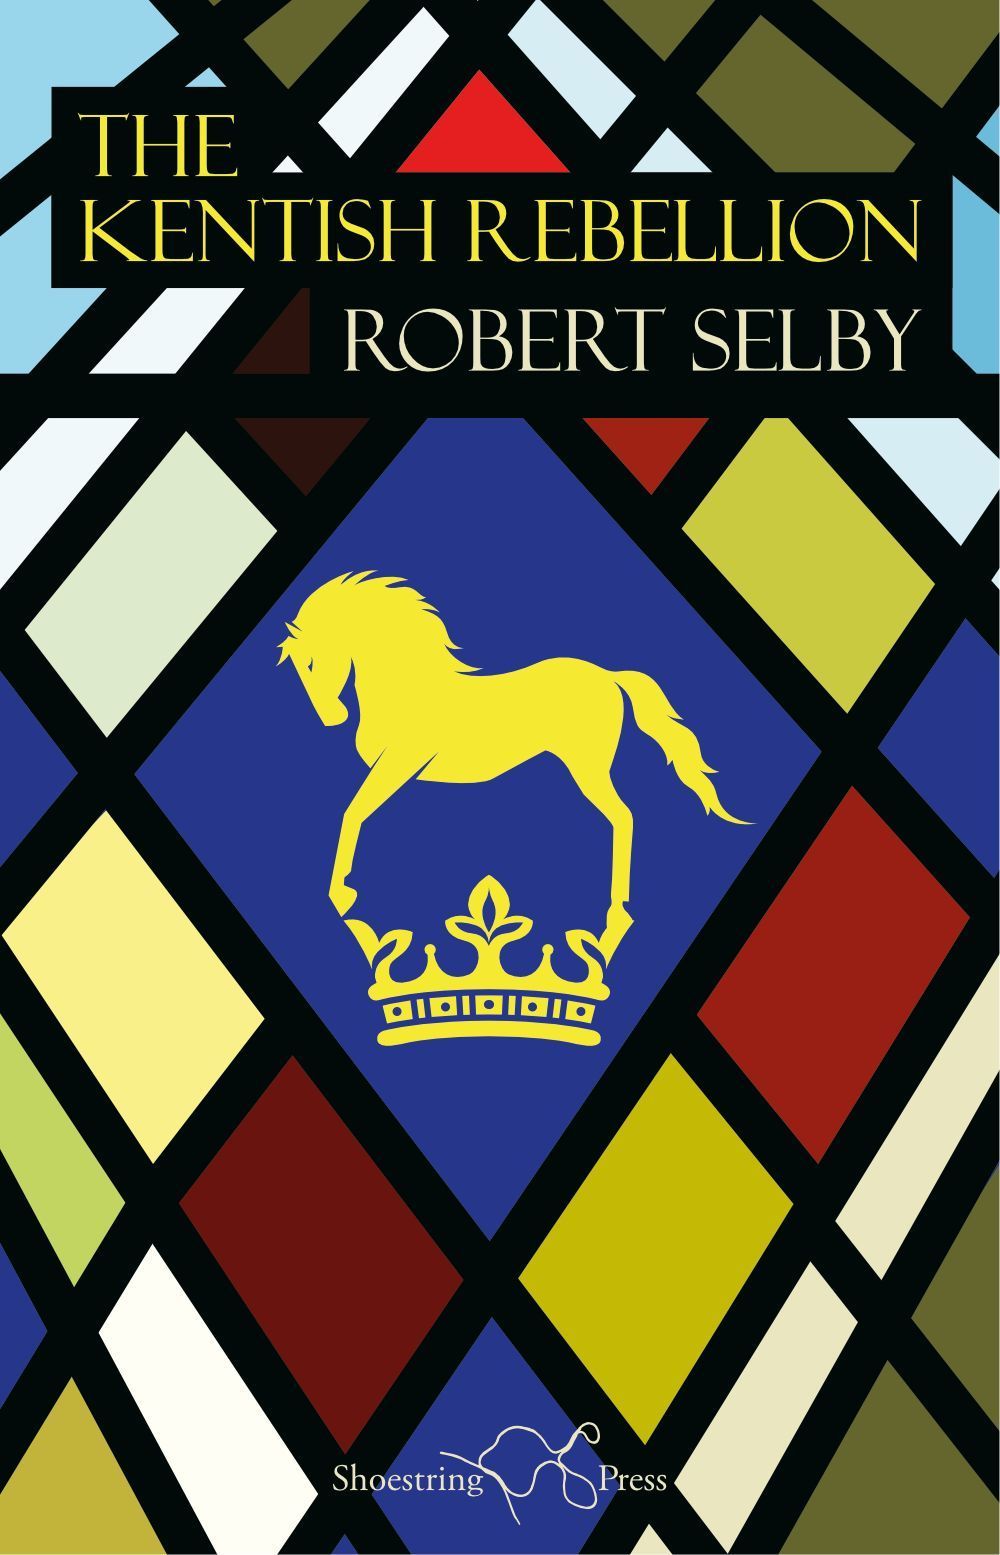 The Drama of History, in Poems: On Robert Selby’s “The Kentish Rebellion”